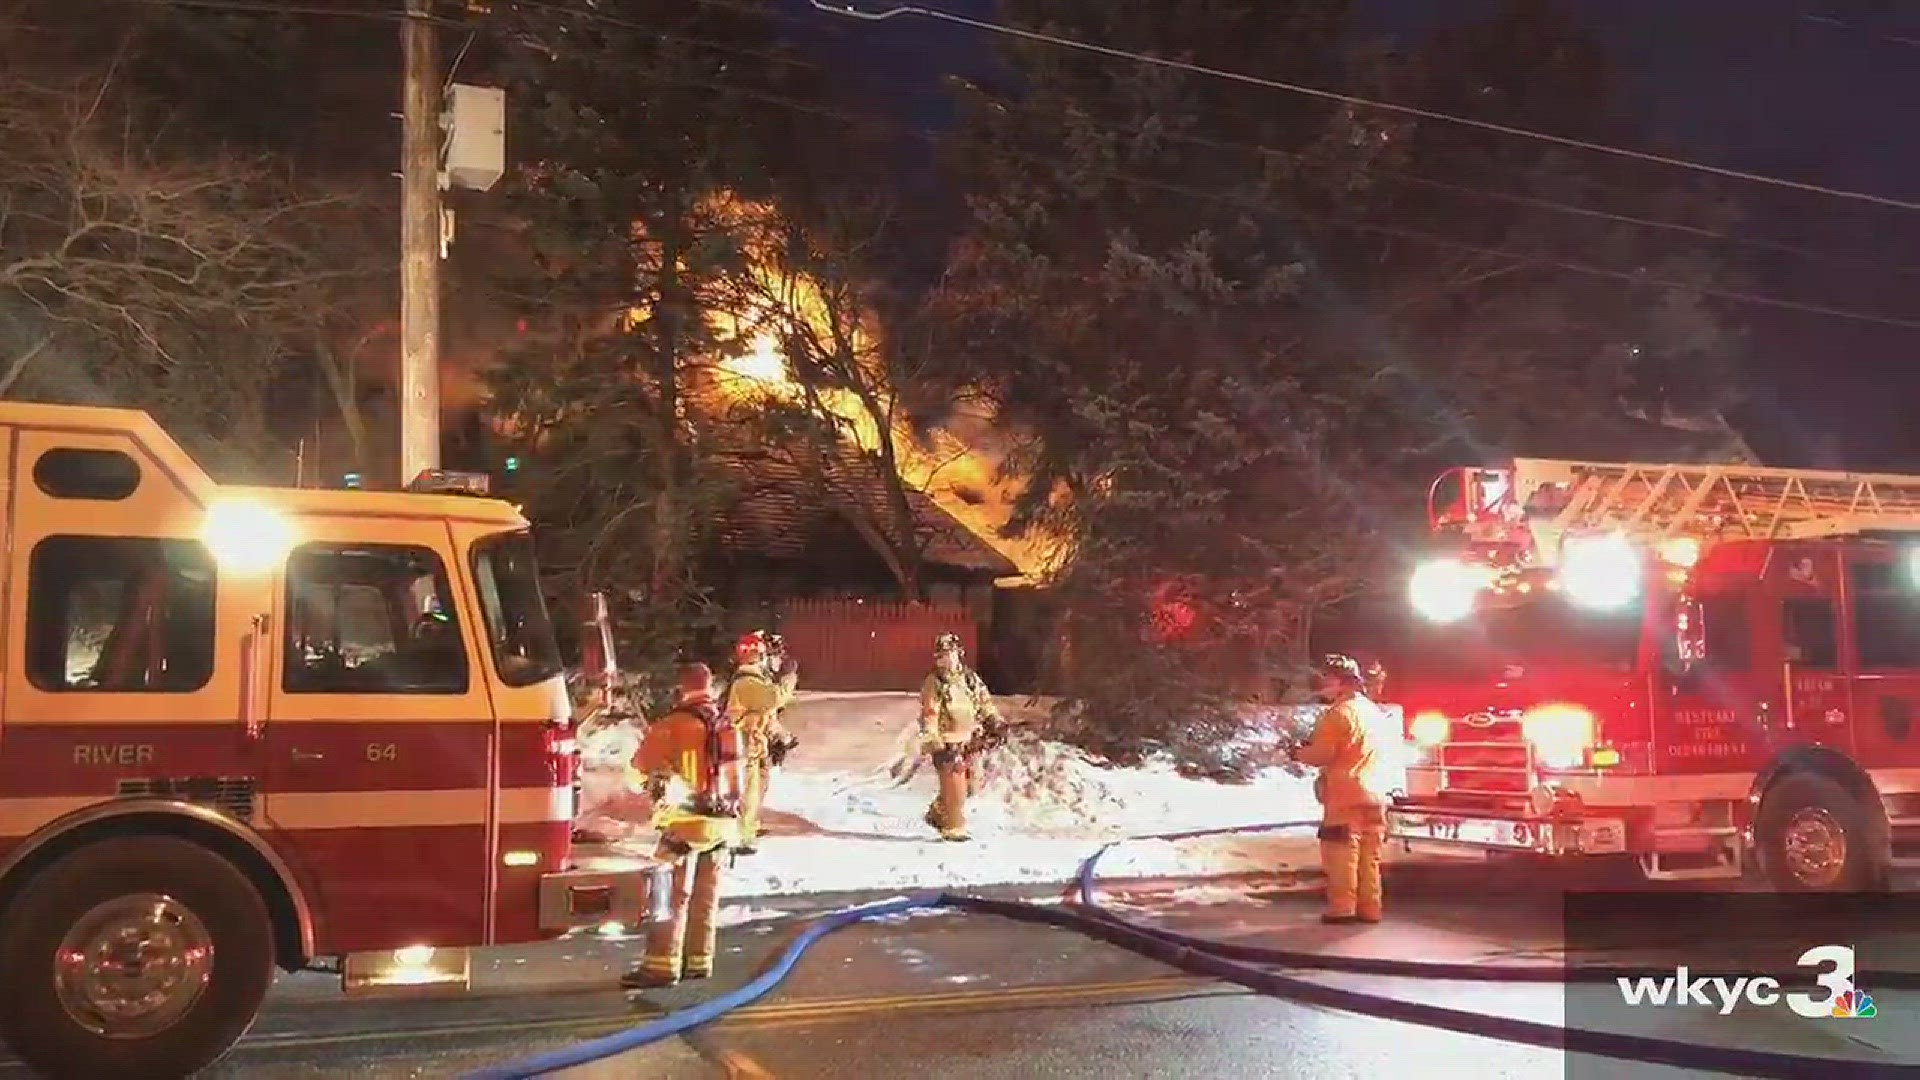 Jan. 4, 2018: Crews closed a portion of Lake Road early this morning to battle a house fire in Rocky River.